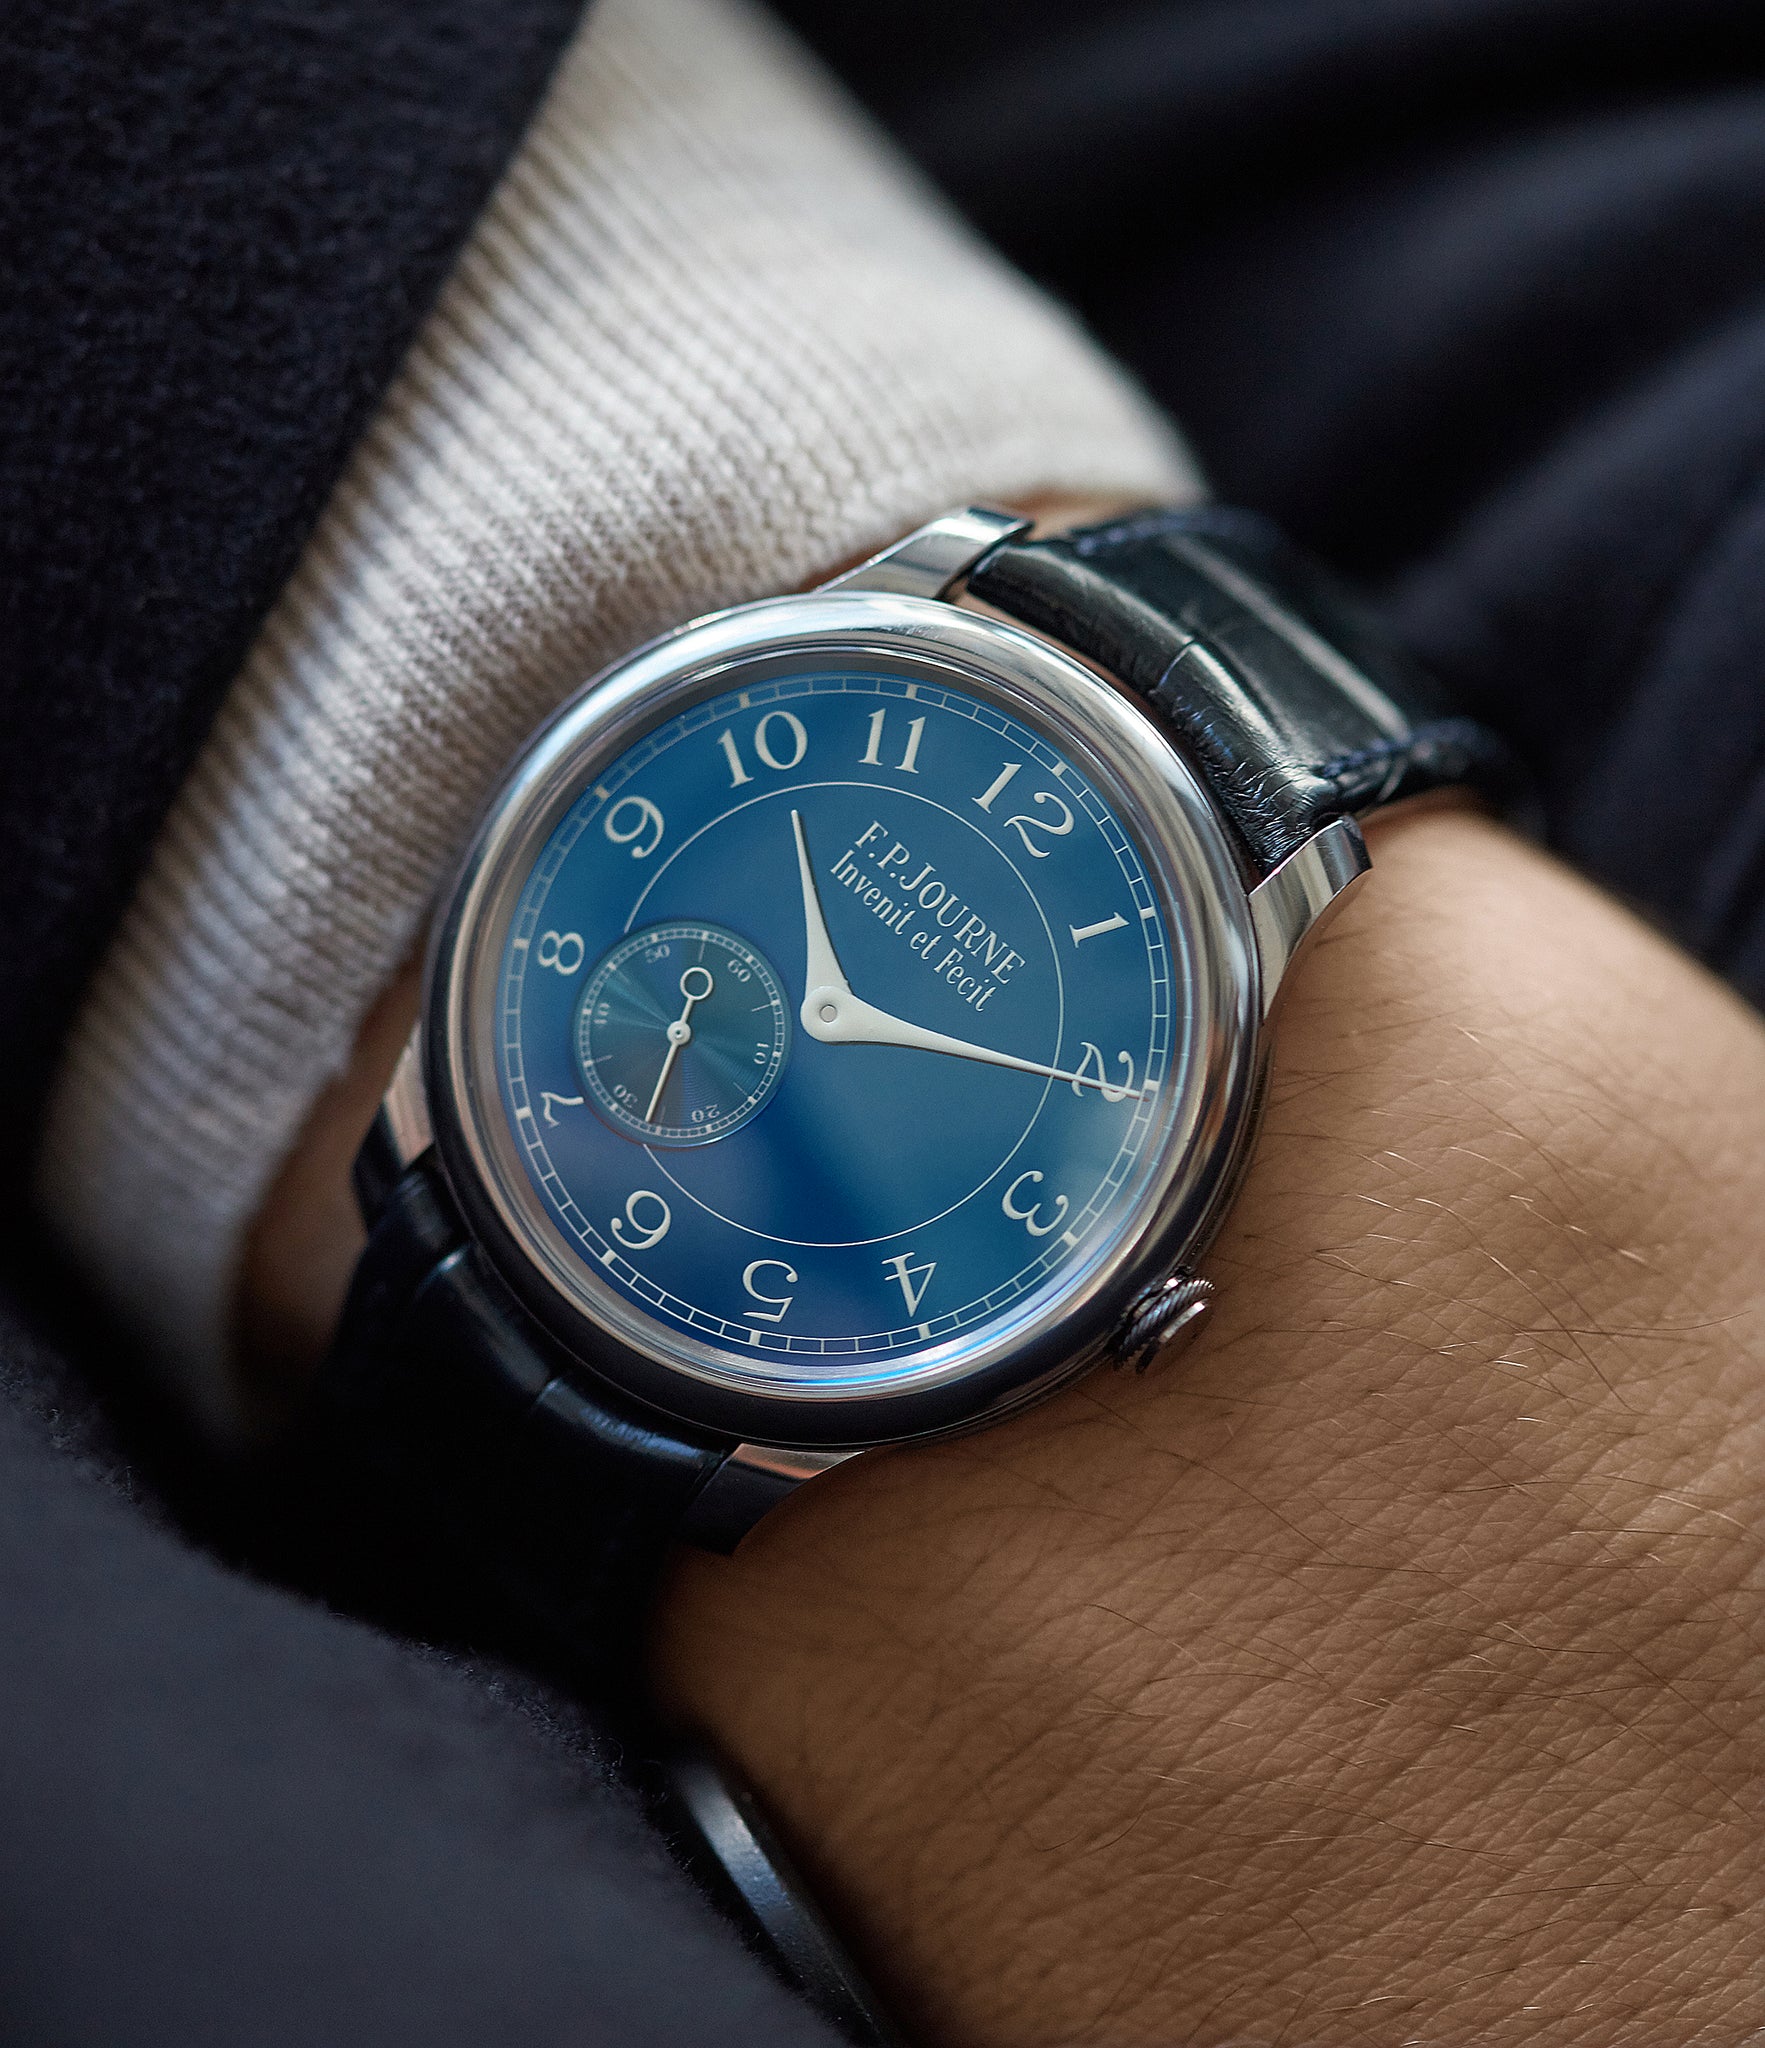 men's luxury dress watch F. P. Journe Chronometre Bleu tantalum blue dial watch independent watchmaker for sale online at A Collected Man London UK specialist of rare watches 